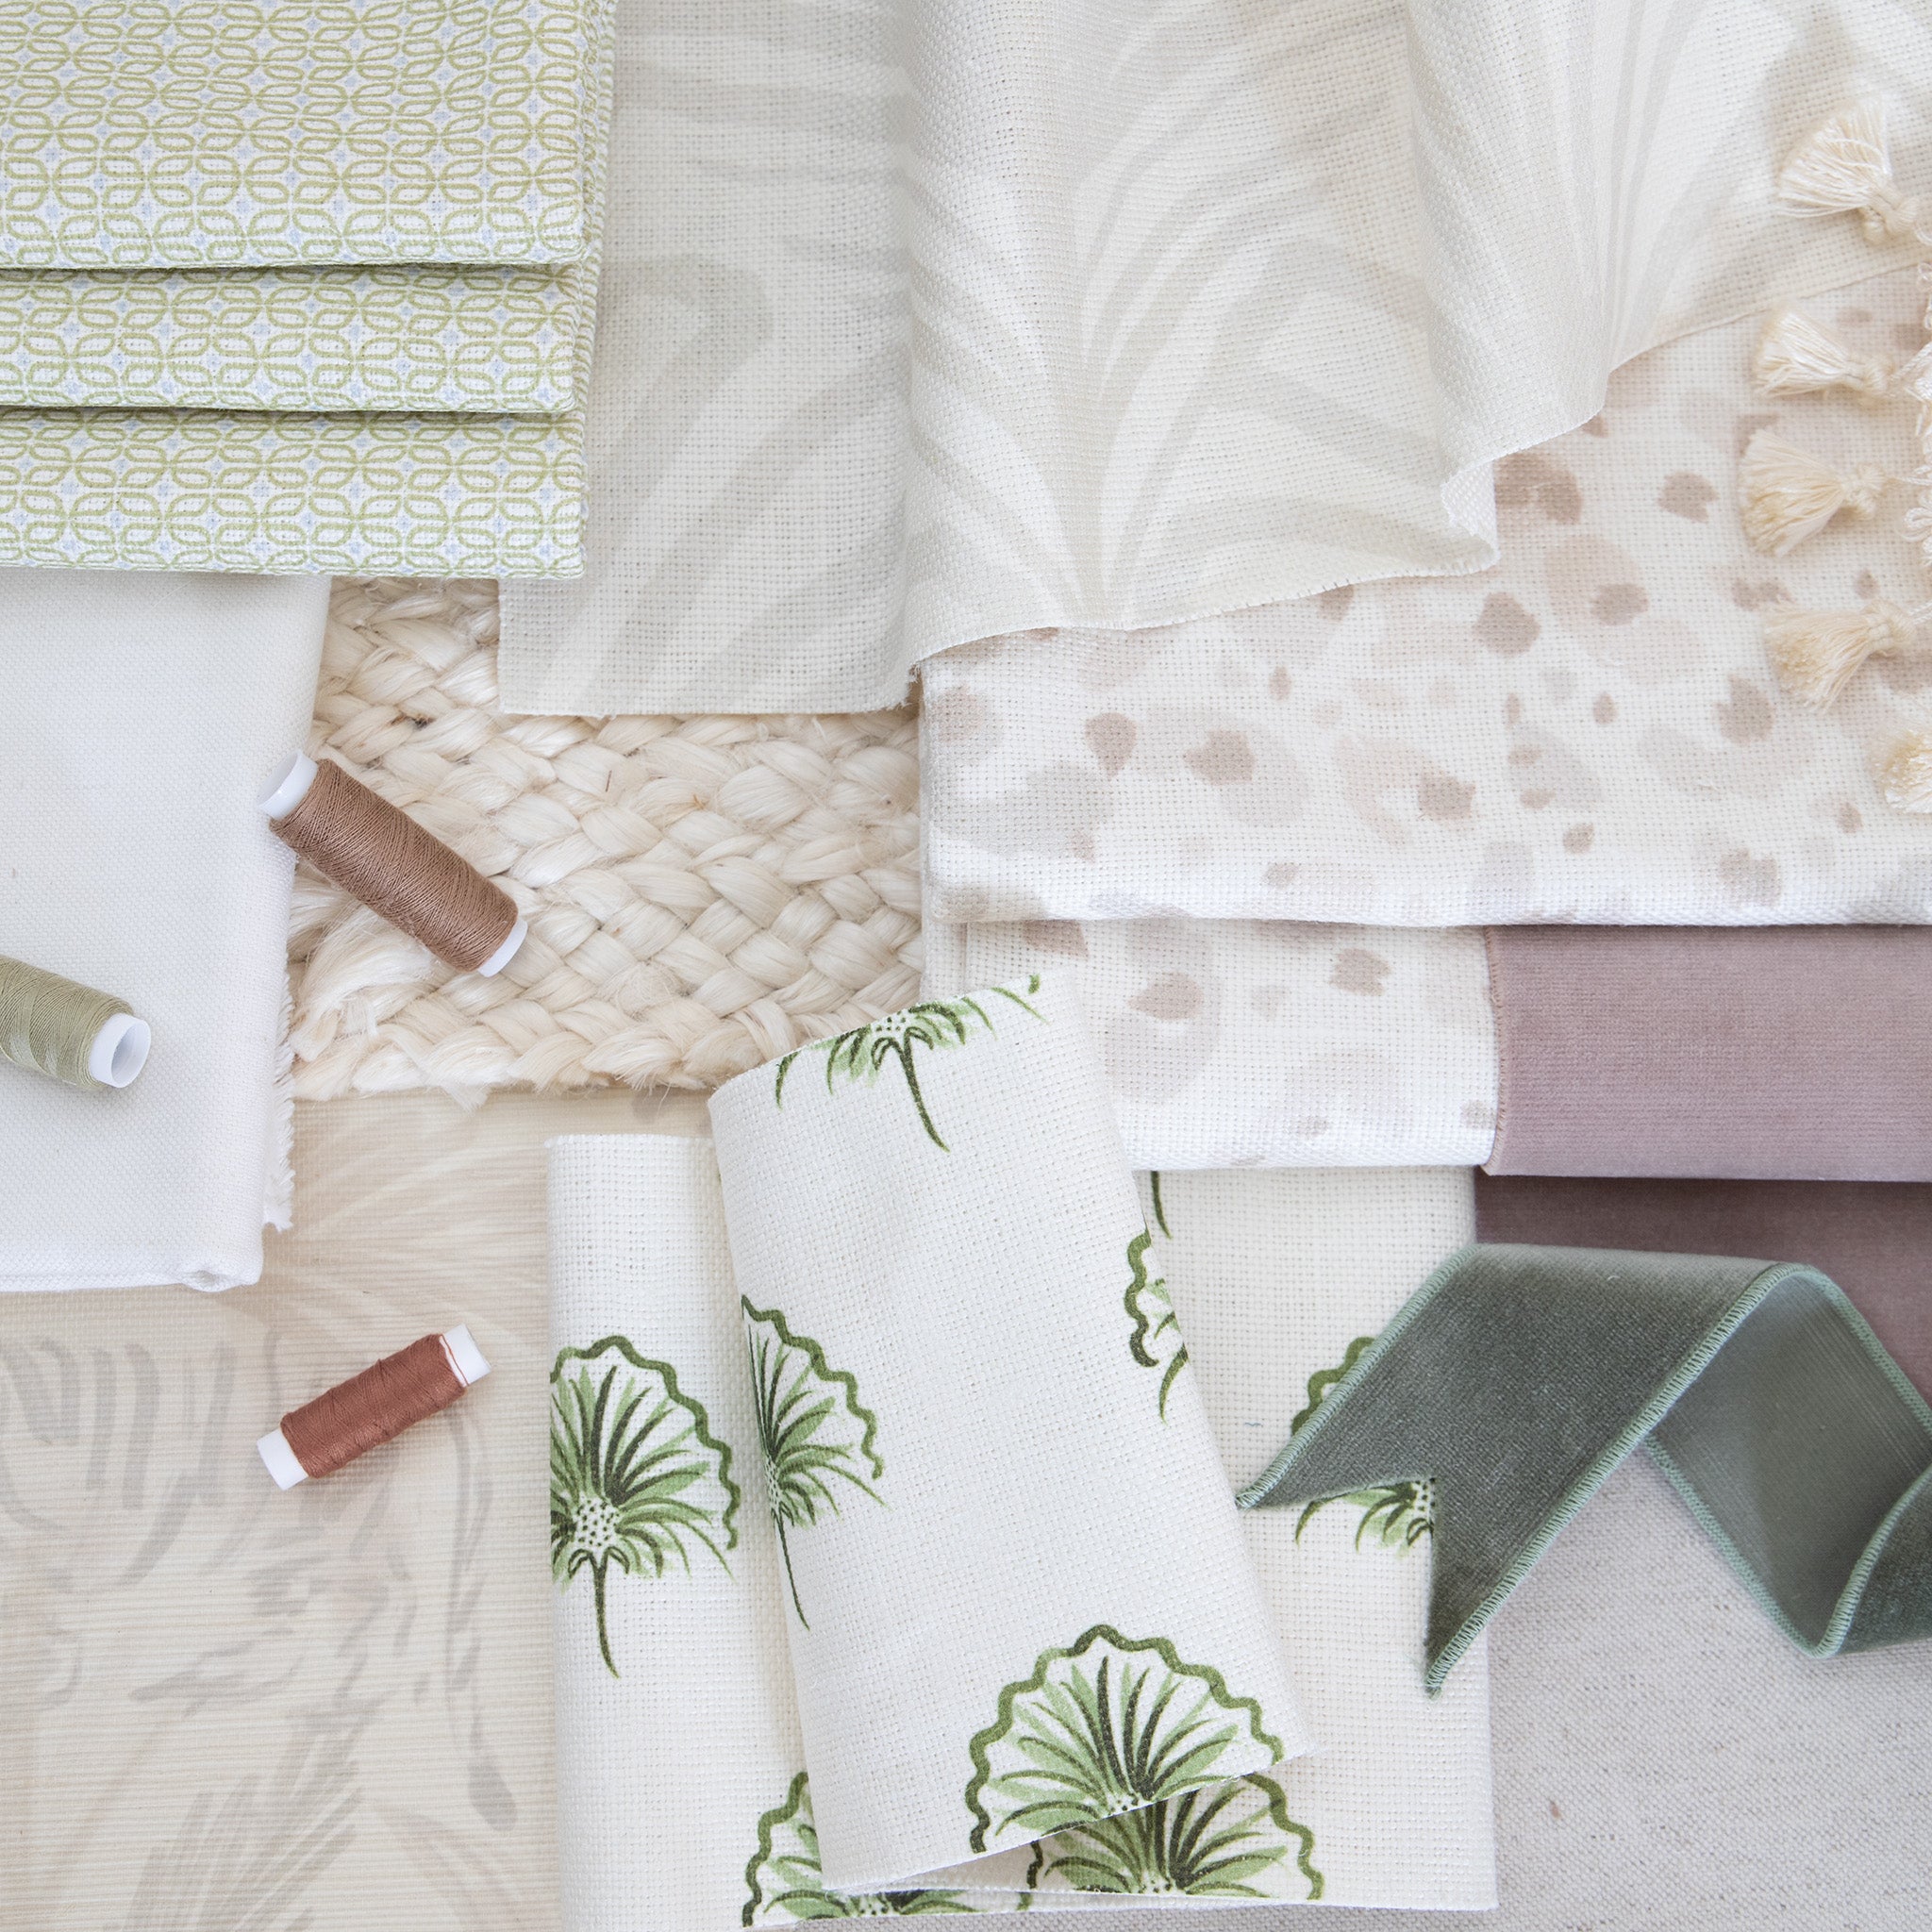 Interior design moodboard and fabric inspirations with Beige Chinoiserie Tiger Printed Linen Swatch, Beige Botanical Stripe Printed Linen Swatch, Beige Animal Printed Linen Swatch and Green Floral Printed Linen Swatch